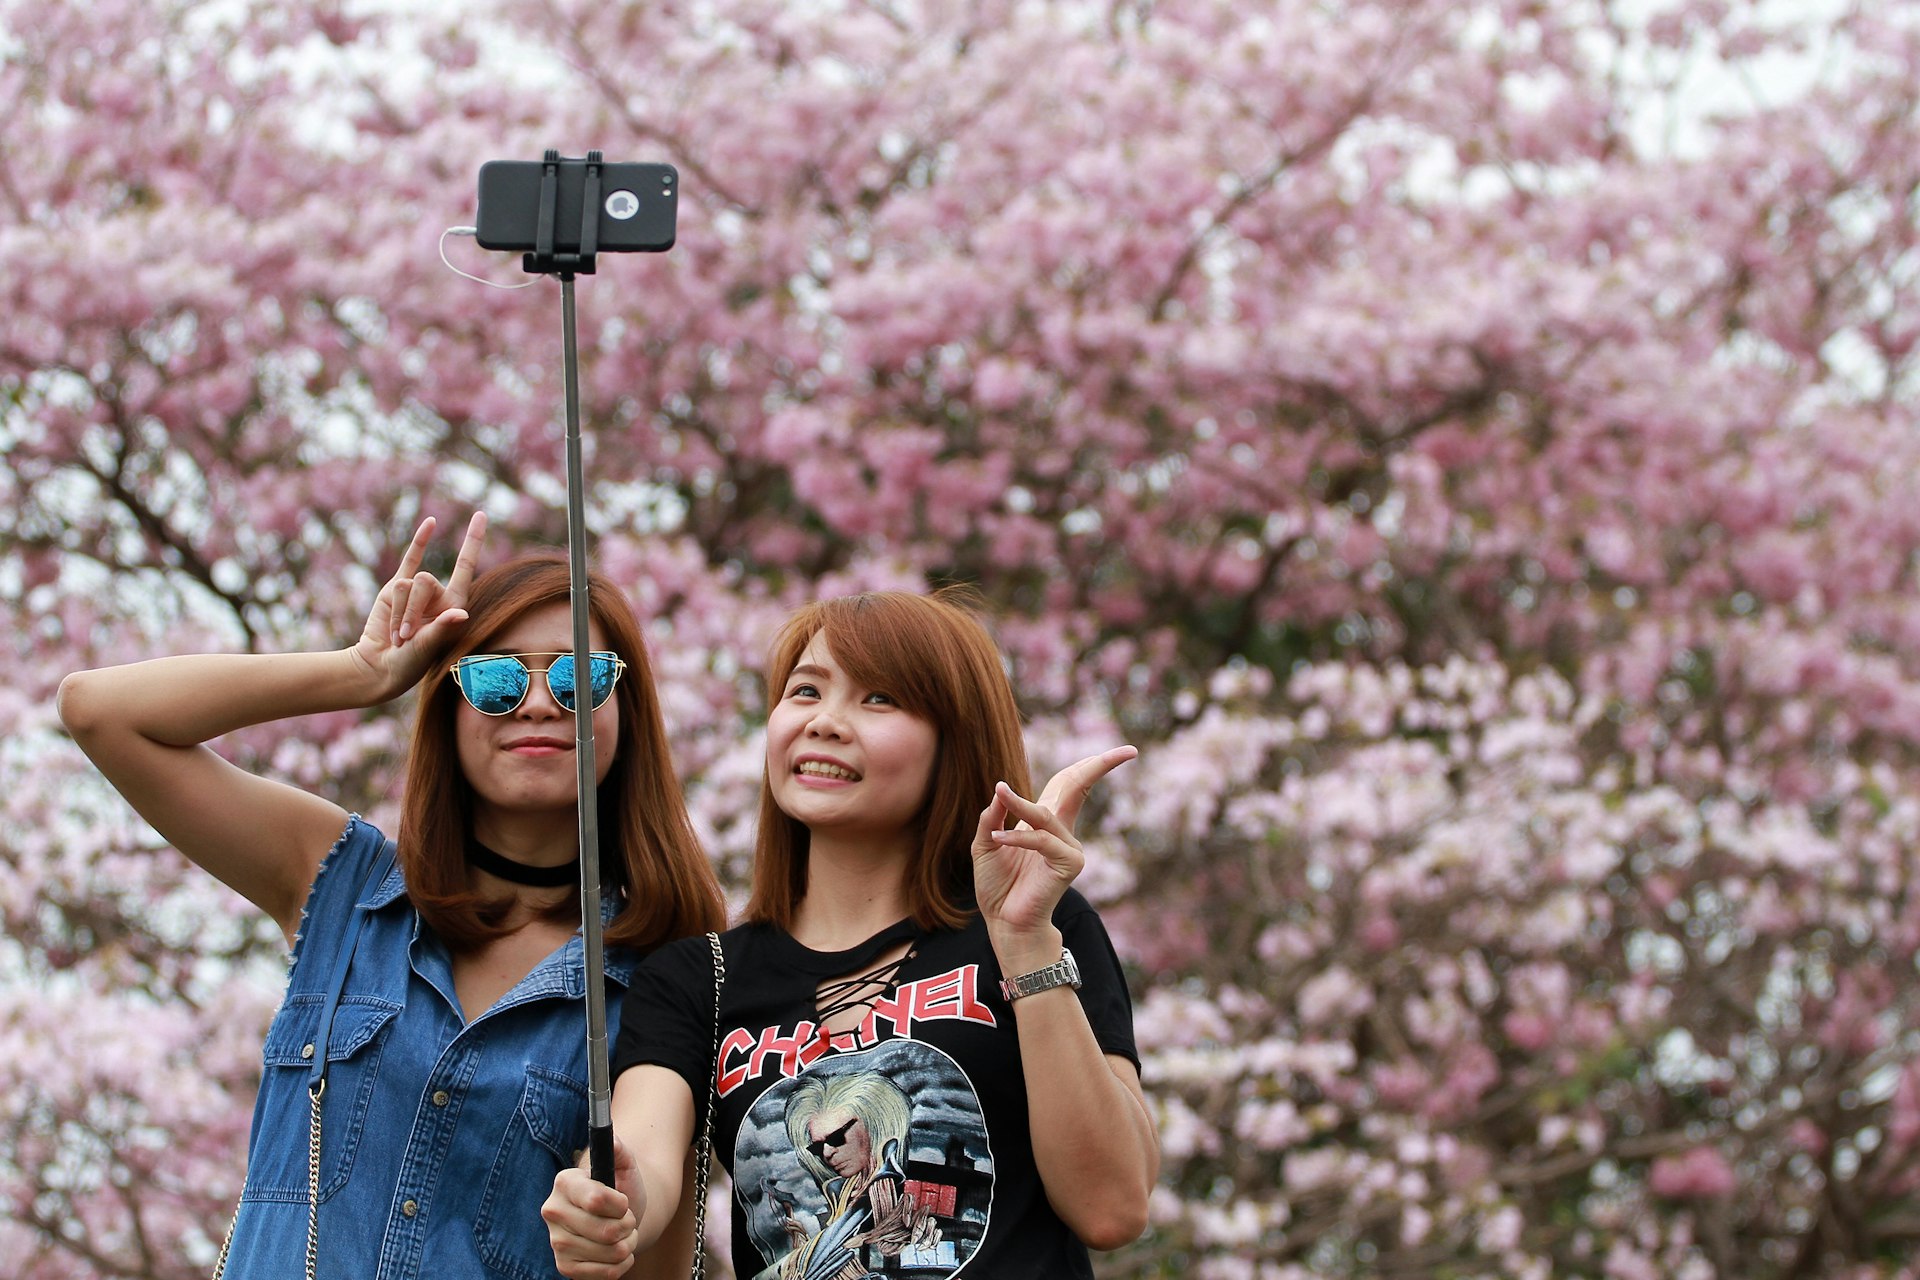 Two Thai women use a selfie stick to take a photo of the beautiful blossoming pink trumpet trees in Chatuchak Park, Bangkok.